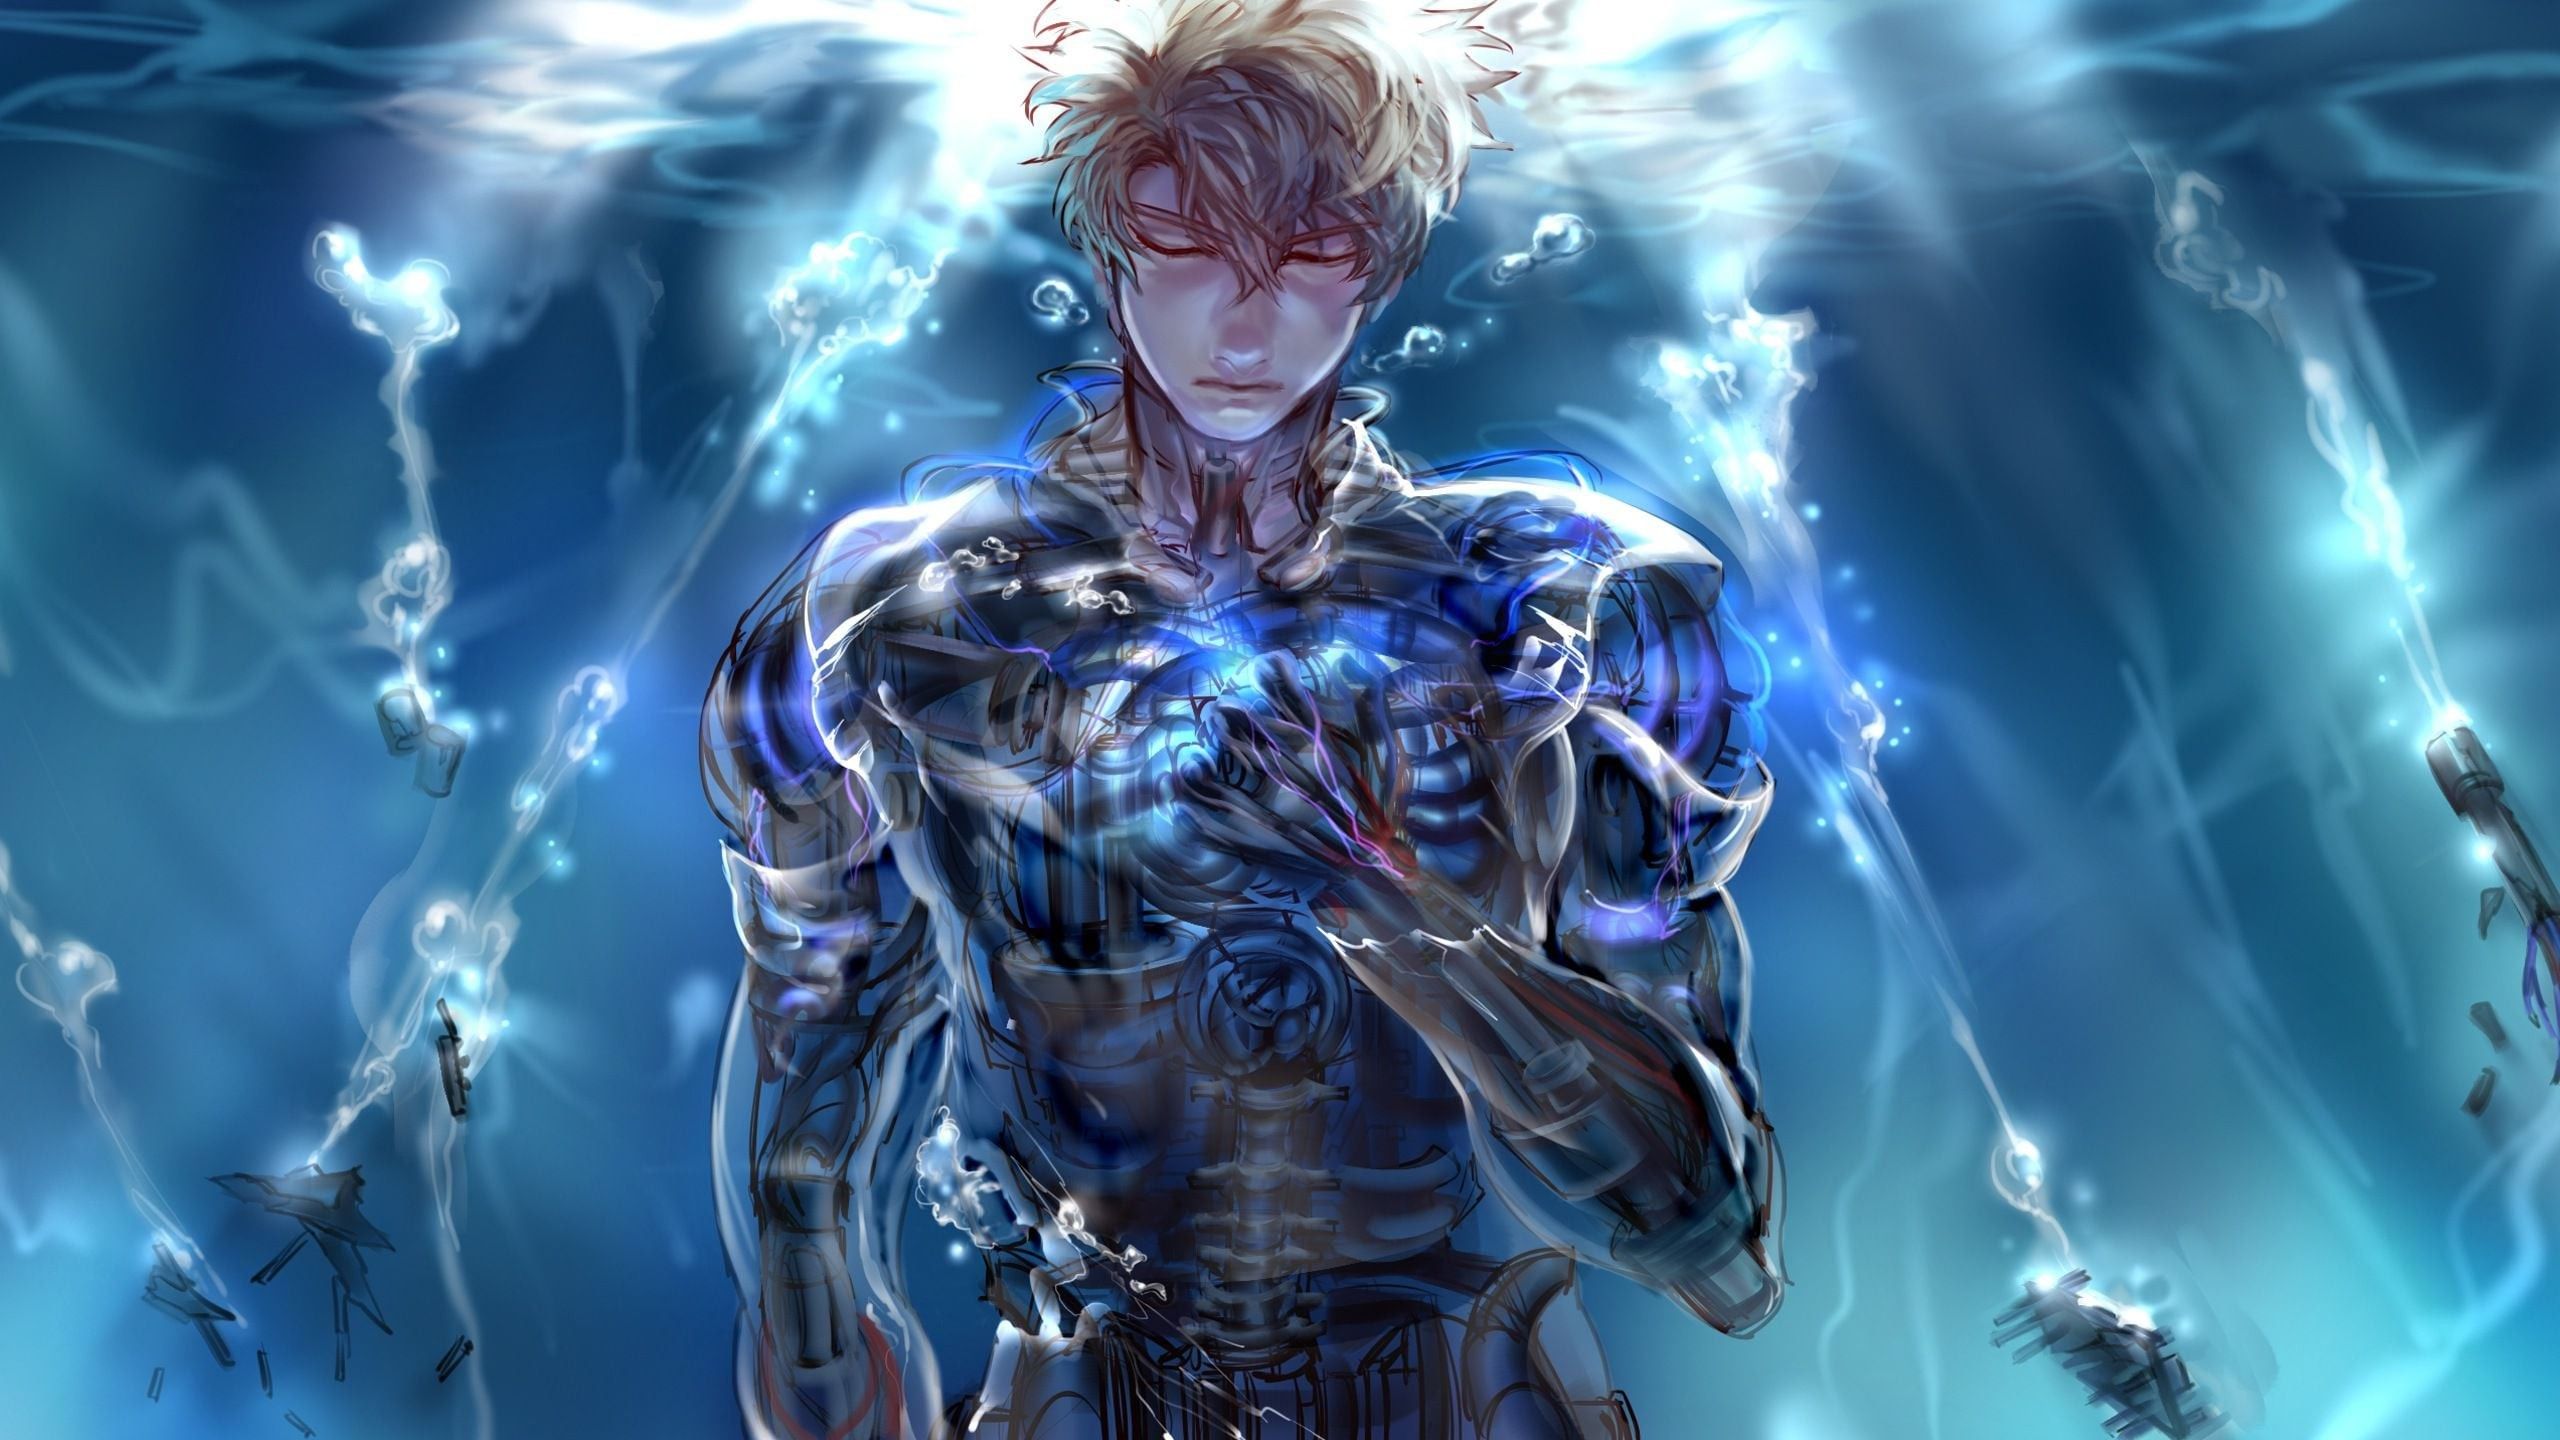 2560x1440 Free Download One Punch Man Genos Wallpaper Download Background 2560x1440 For Your Desktop Mobile Tablet Explore One Punch Man Hd Wallpaper One Punch Man Wallpaper One Punch Man